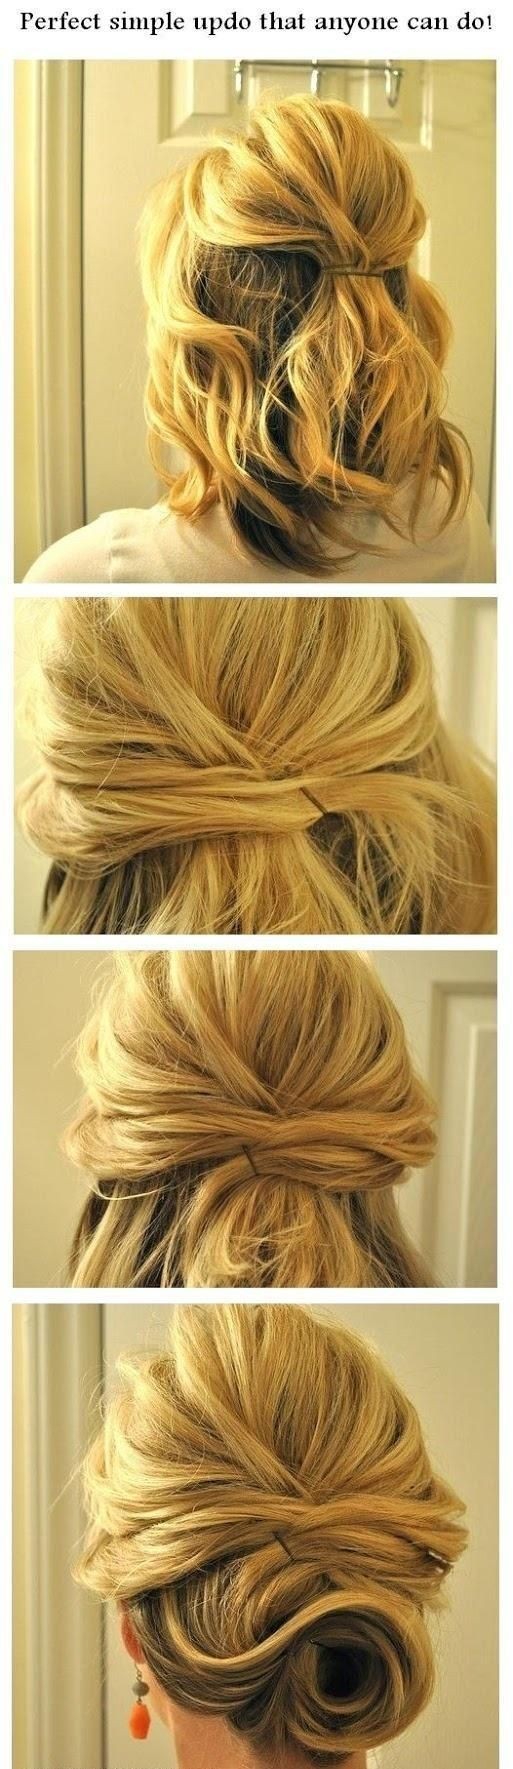 Perfect tutorial for simple updos